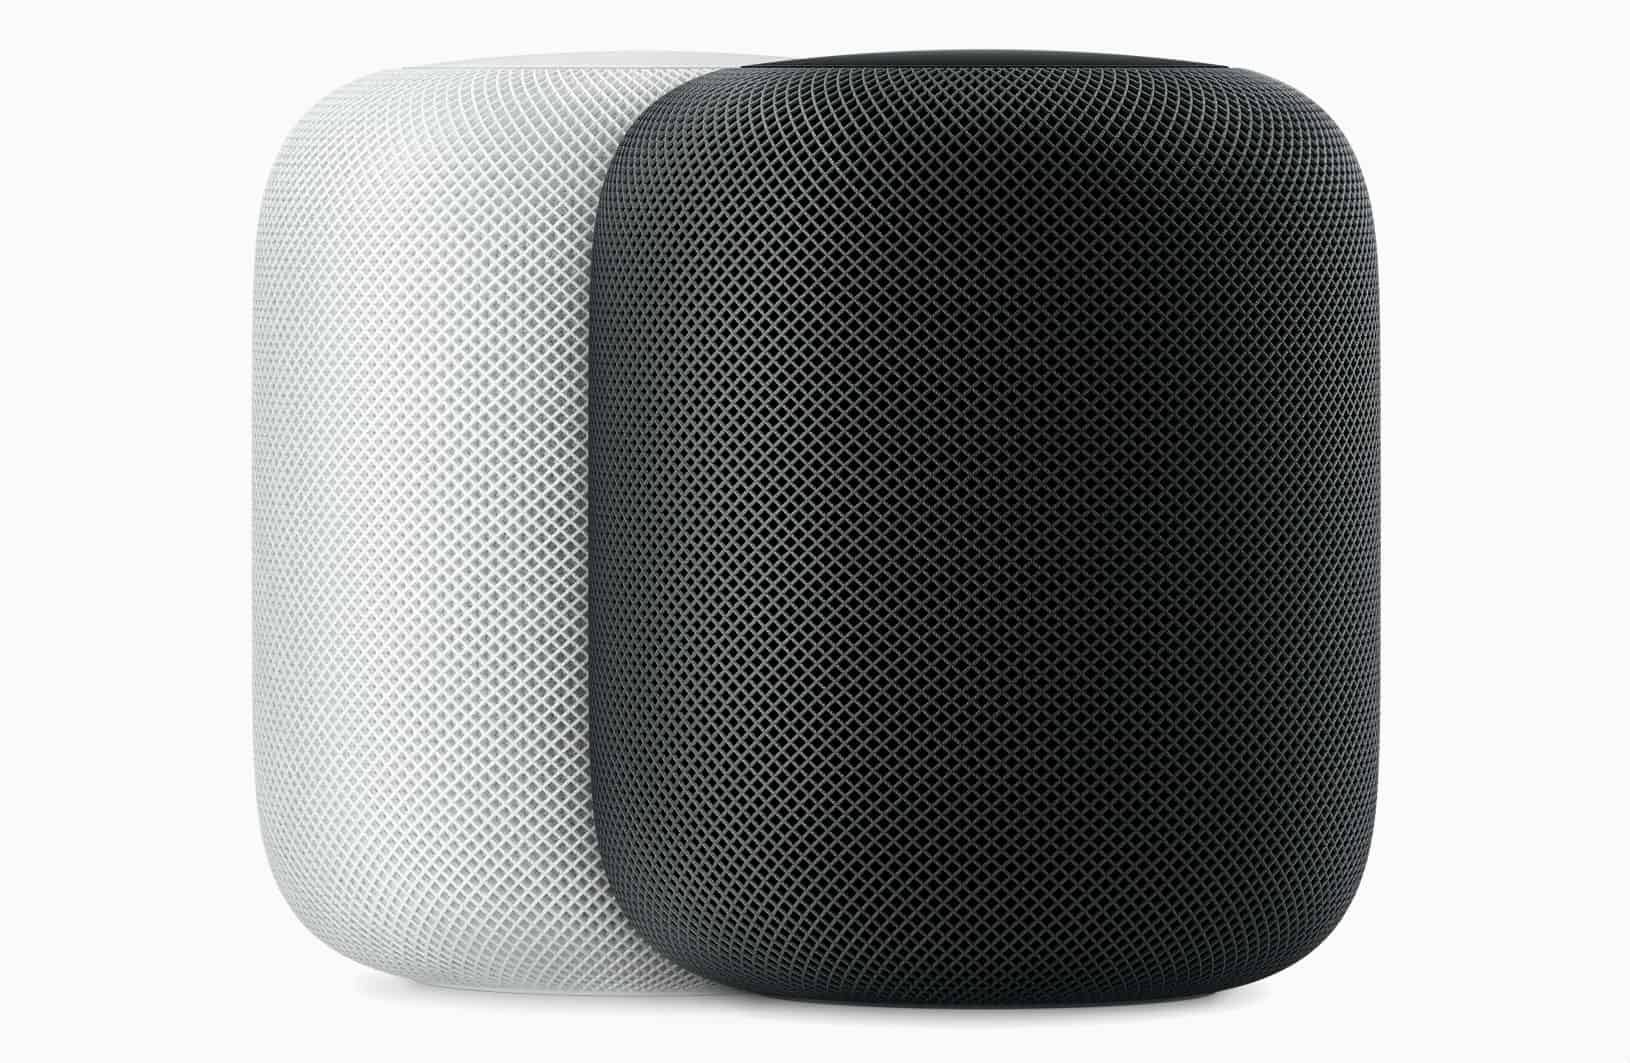 With AirPlay 2, two HomePods now work in stereo.